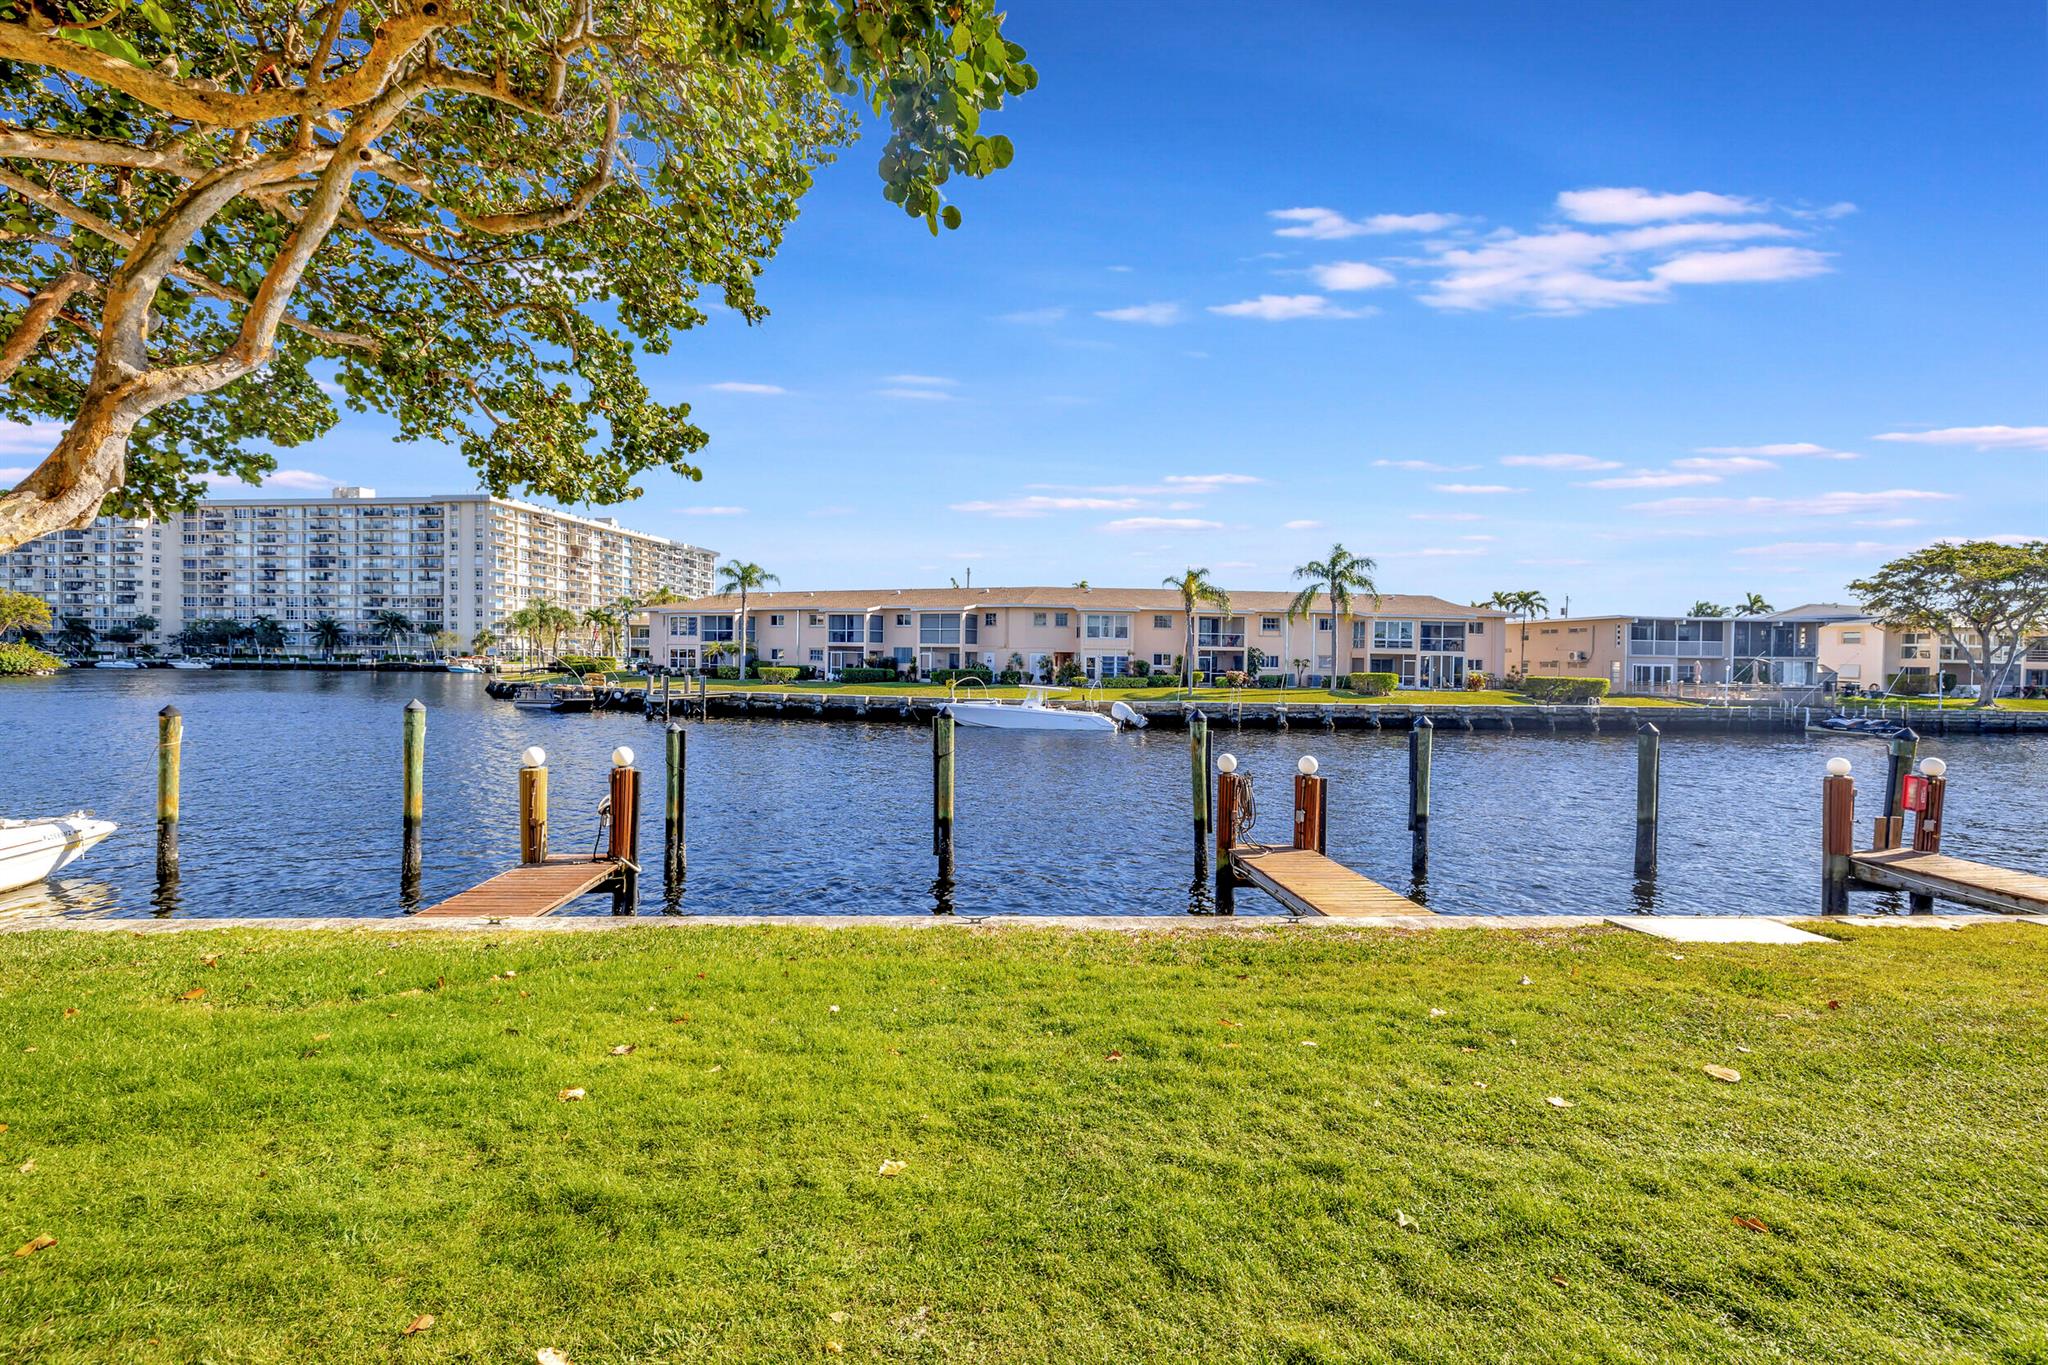 Welcome home to Noble Point, an unparalleled boaters dream of a small gated waterfront community & the 40 yr Cert has been completed!! Your assigned boat dock with water, electric and lighting is directly behind this ground floor Deluxe Model (only 11 of these large units in the complex). The Premium Southern Exposure and Extensive backyard lawn all overlooking the wide water basin views add to the charm of this rarely available condo. Besides the private dock you have covered parking for your land toy as well! A true hidden gem of a complex has a heated/cooled pool, clubhouse, hot tub, tennis/pickle ball courts and a great tiki hut BBQ area. Outside there is a Large screened patio for ultimate SoFlo living, inside features hard wood floors and neutral colors making this one a must see!